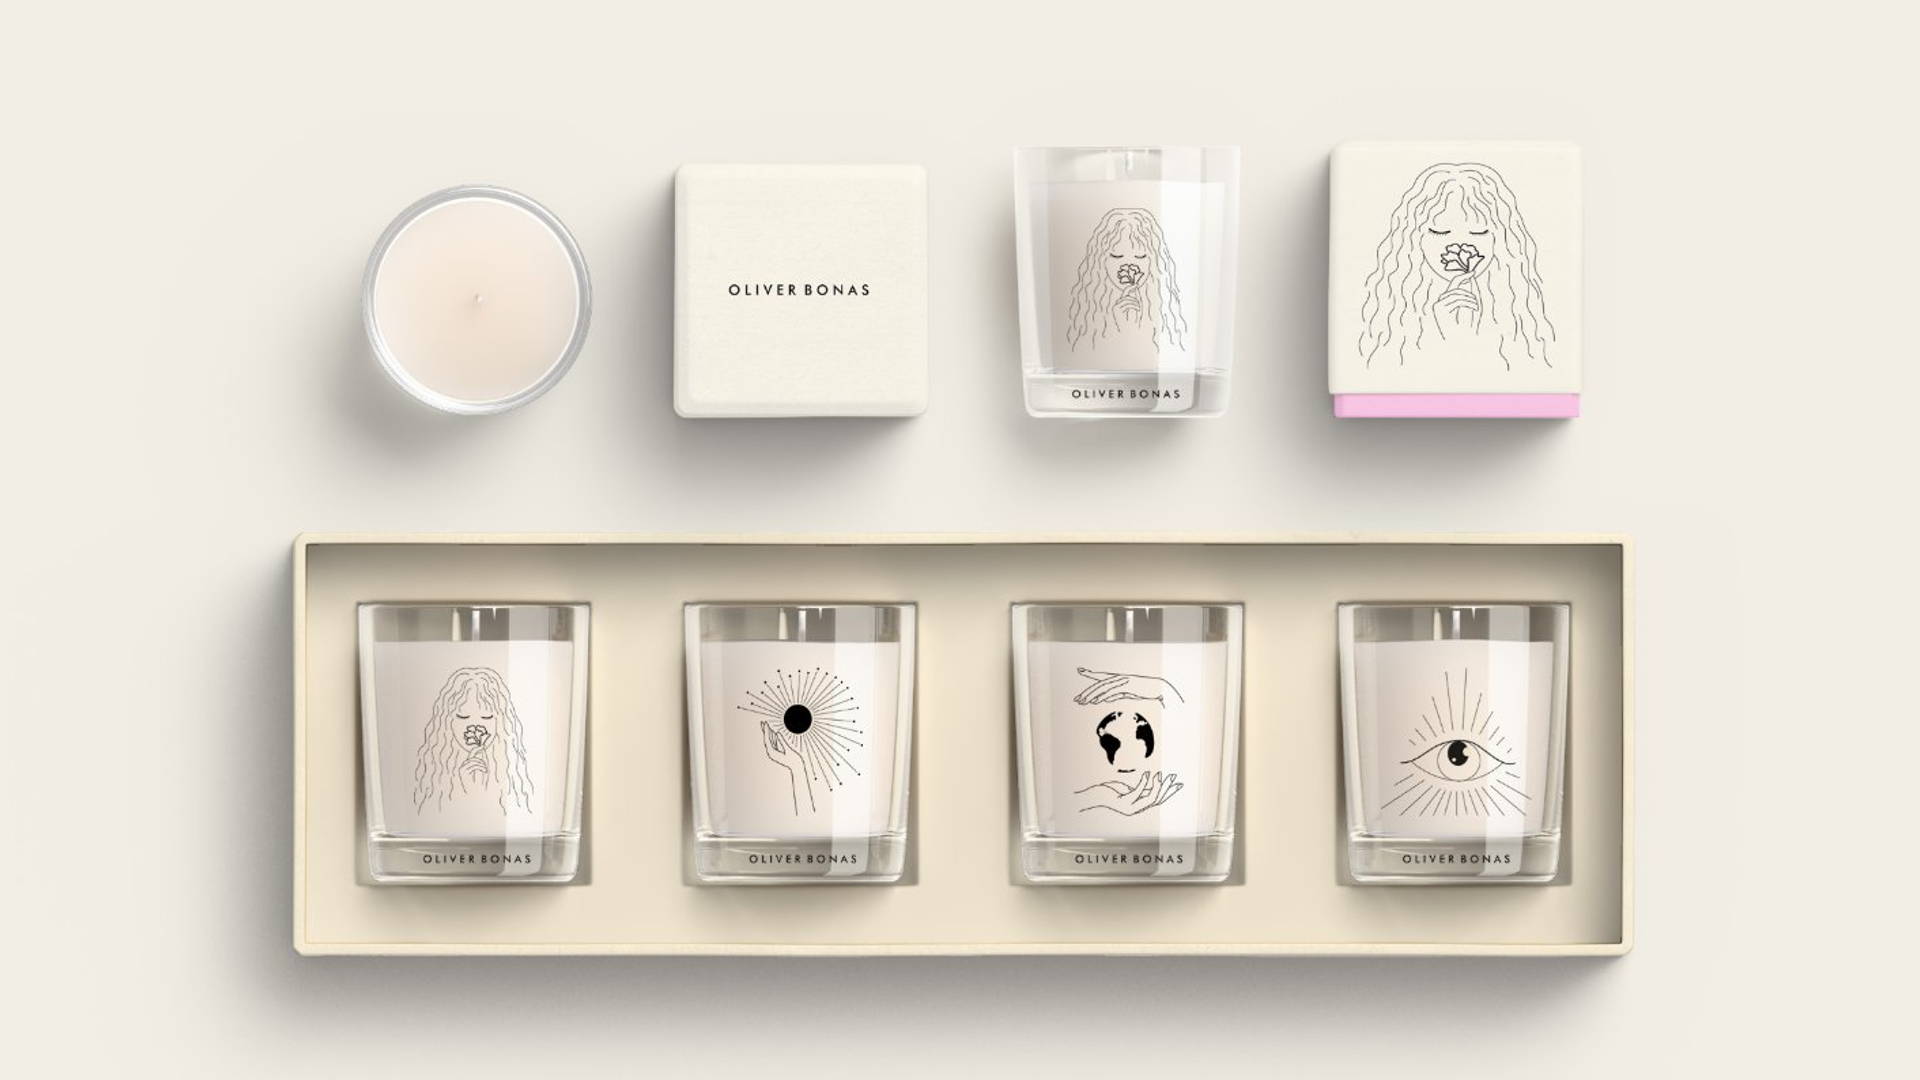 Featured image for Oliver Bonas Candle Concept Has Each Scent Containing A Crystal